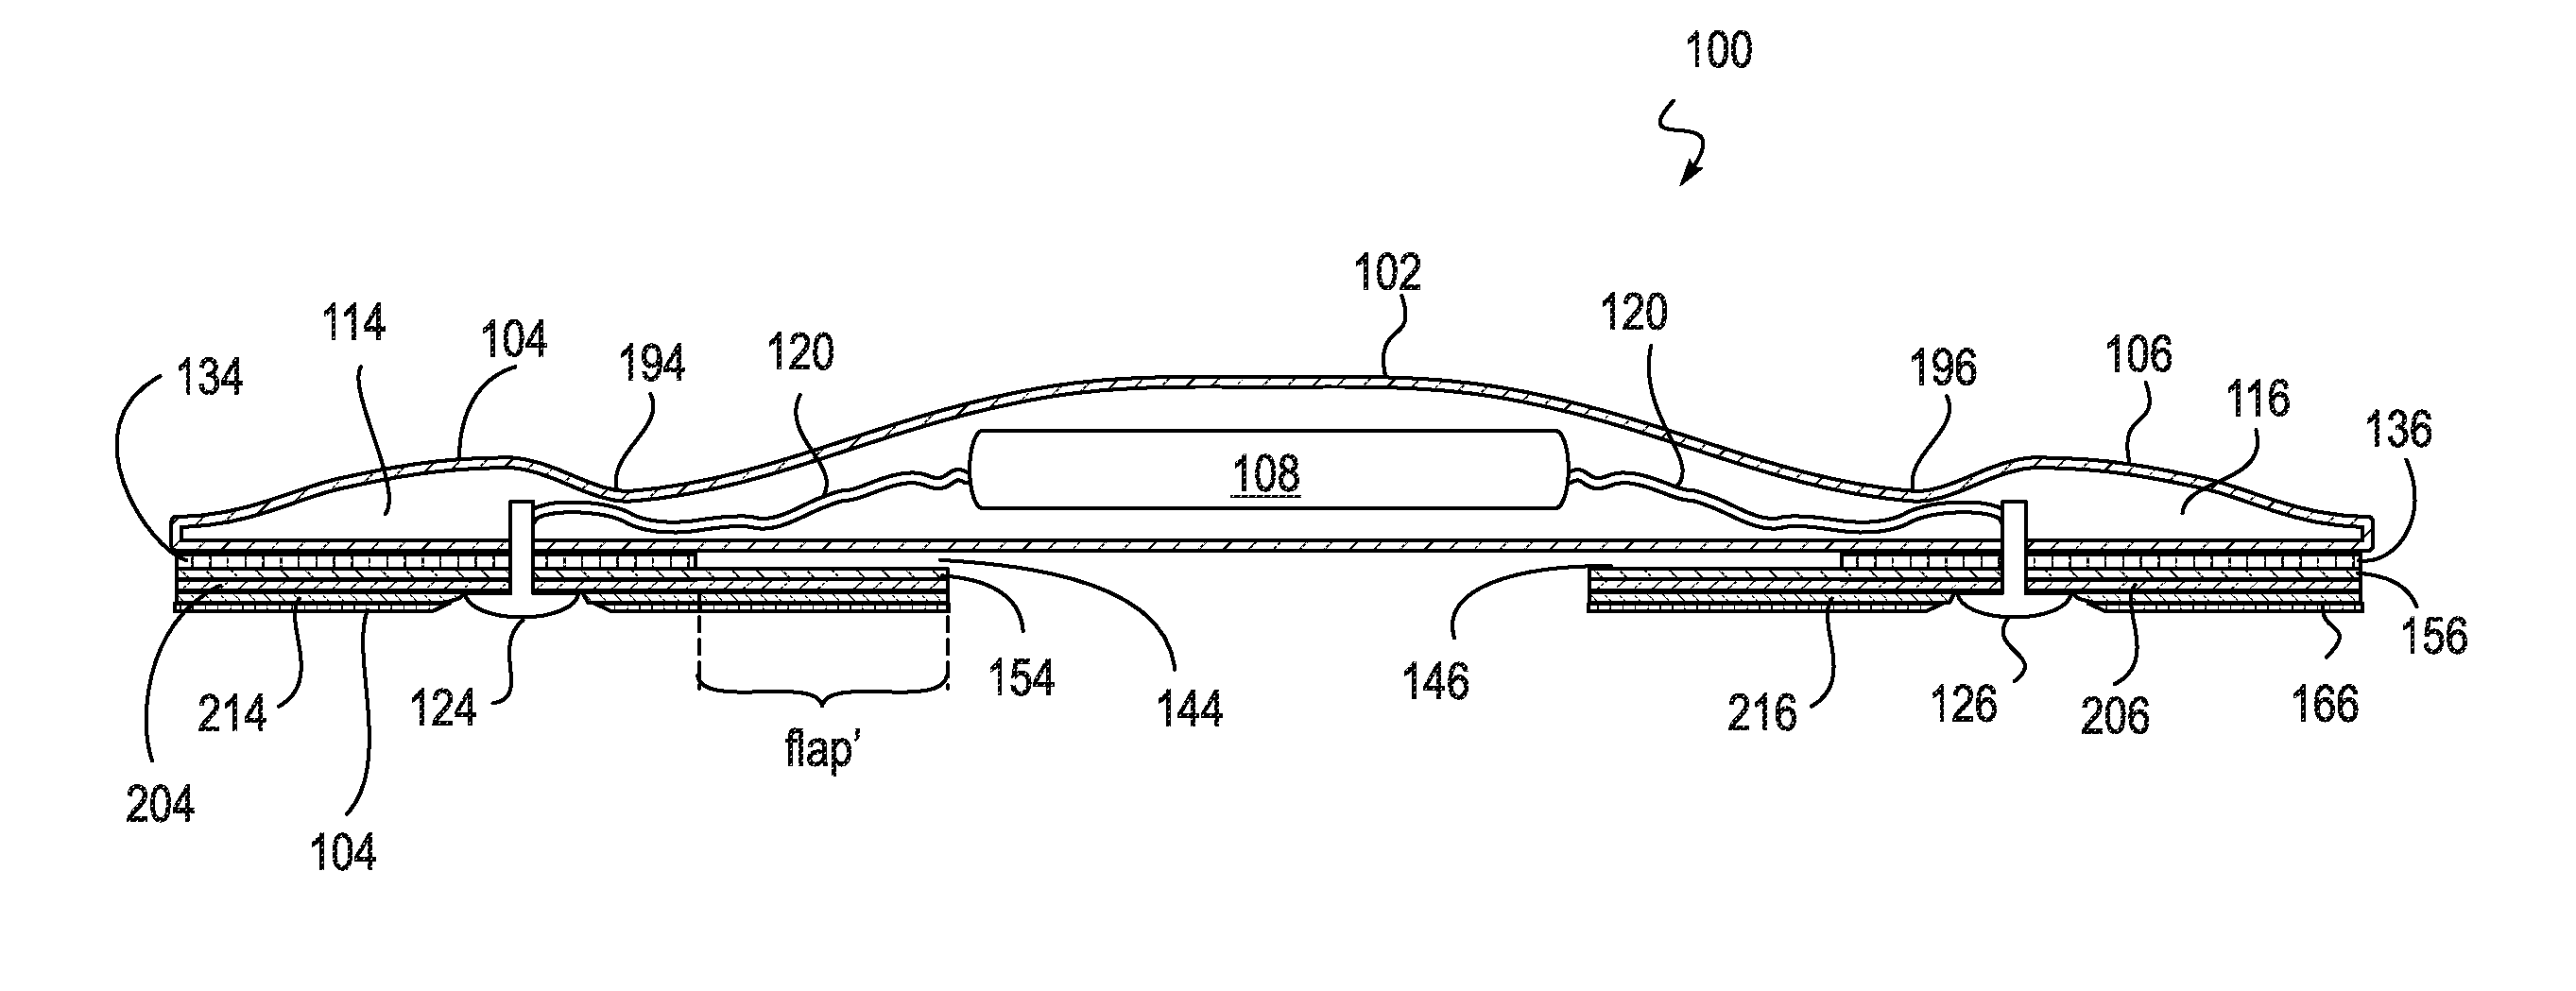 Device features and design elements for long-term adhesion